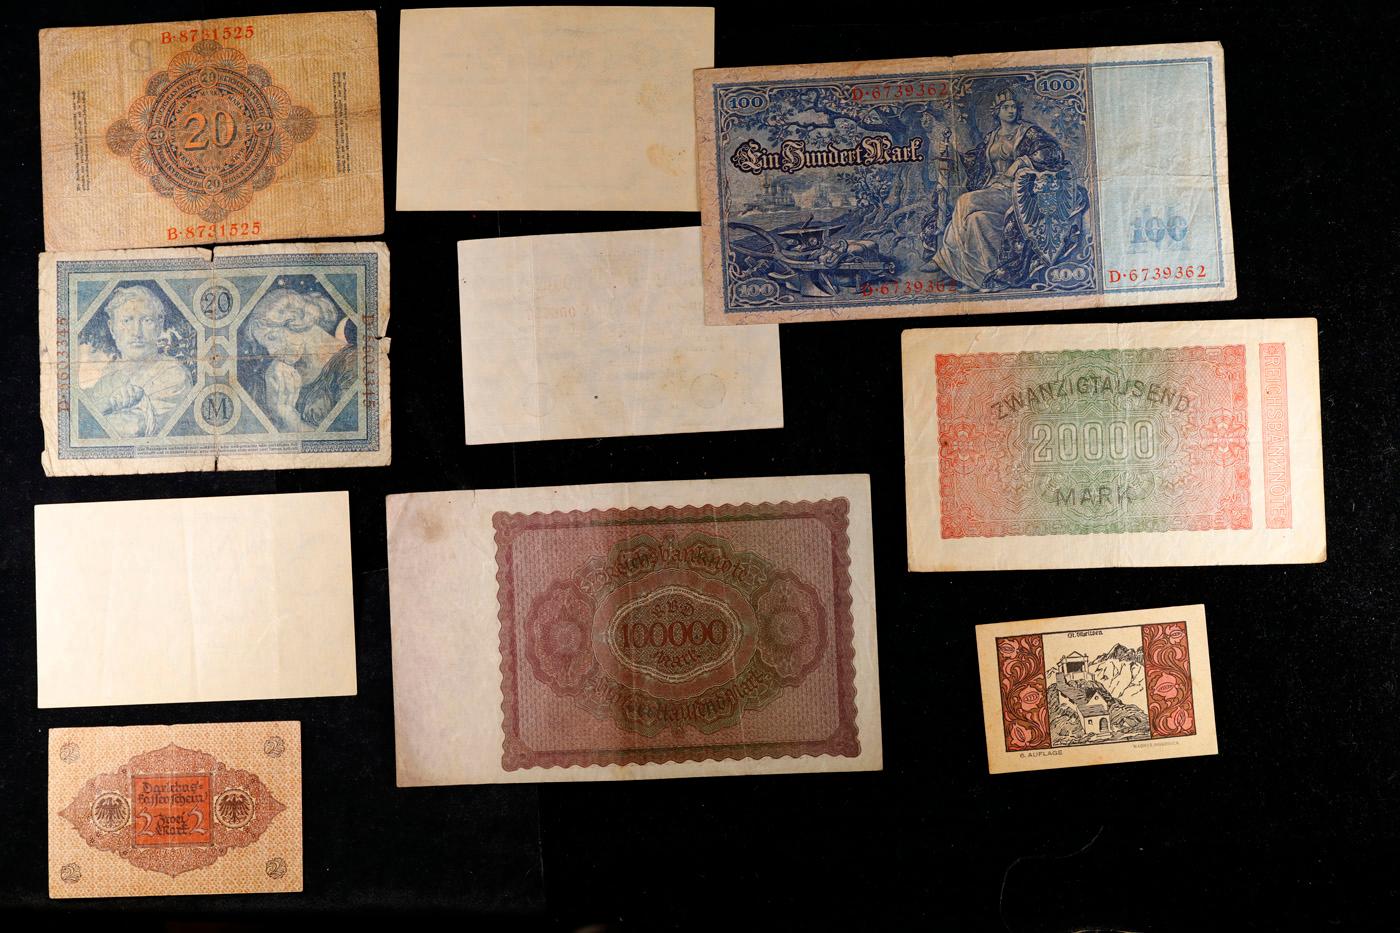 Lot of 10 WWI Era German and Austrian Notes, Various Years and Denominations! Grades